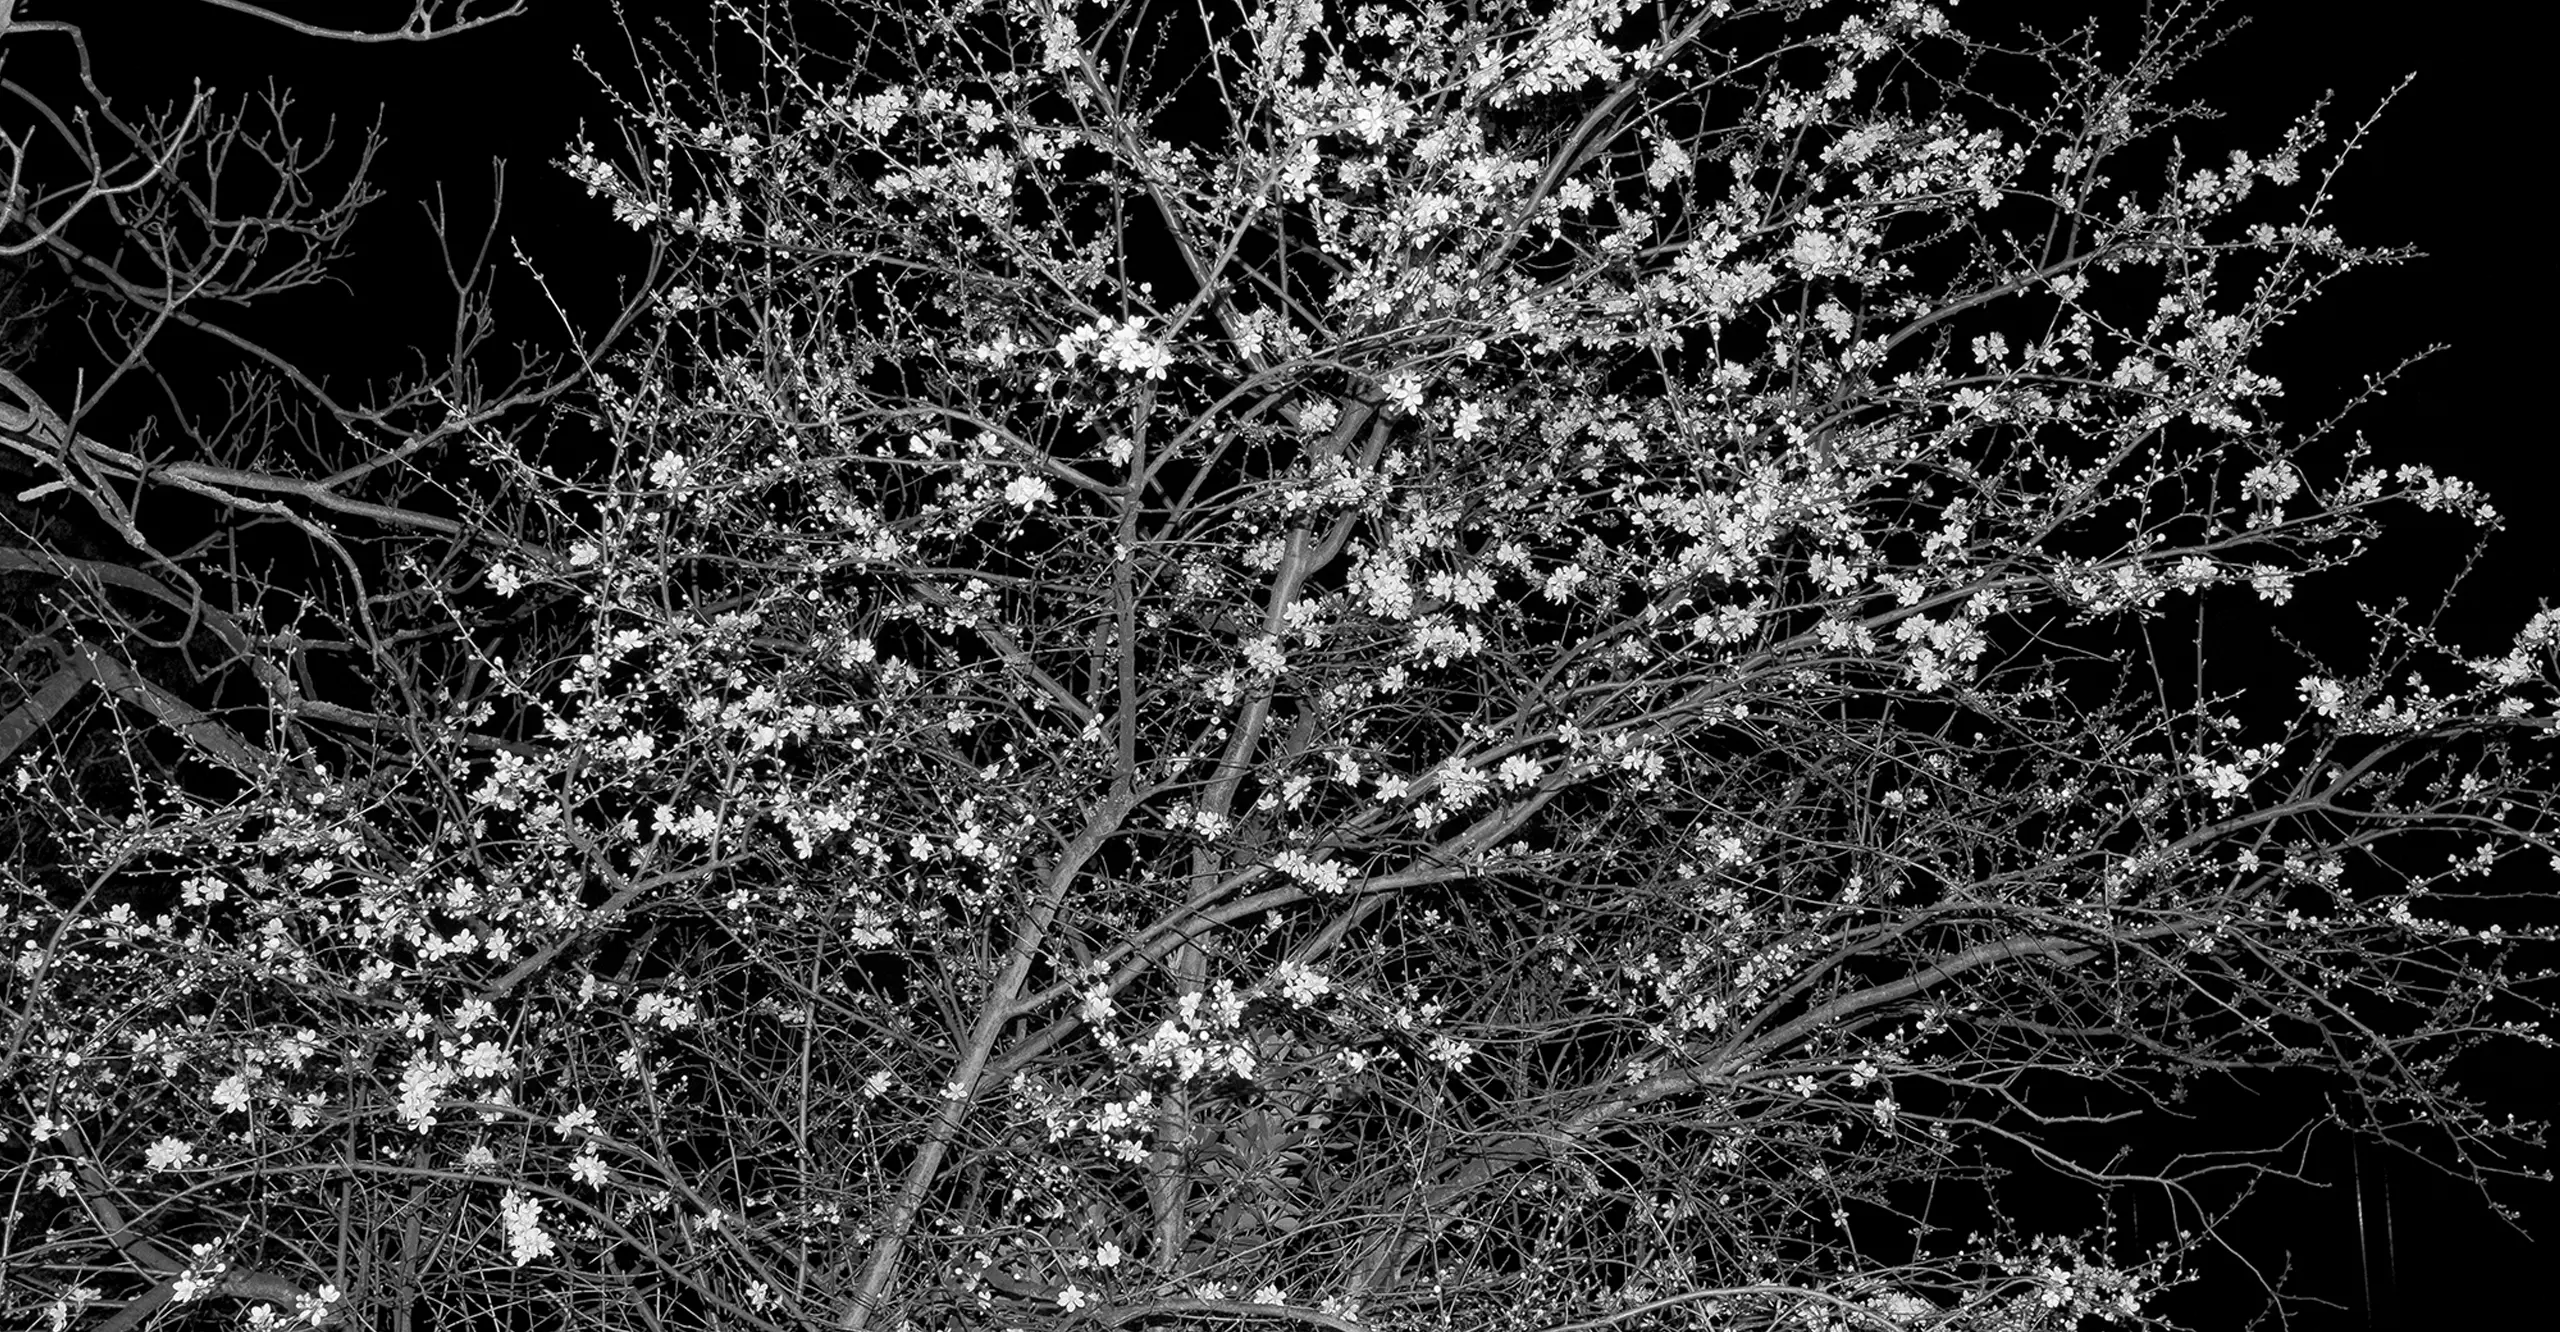 Bush with flowers photographed at night in black and white